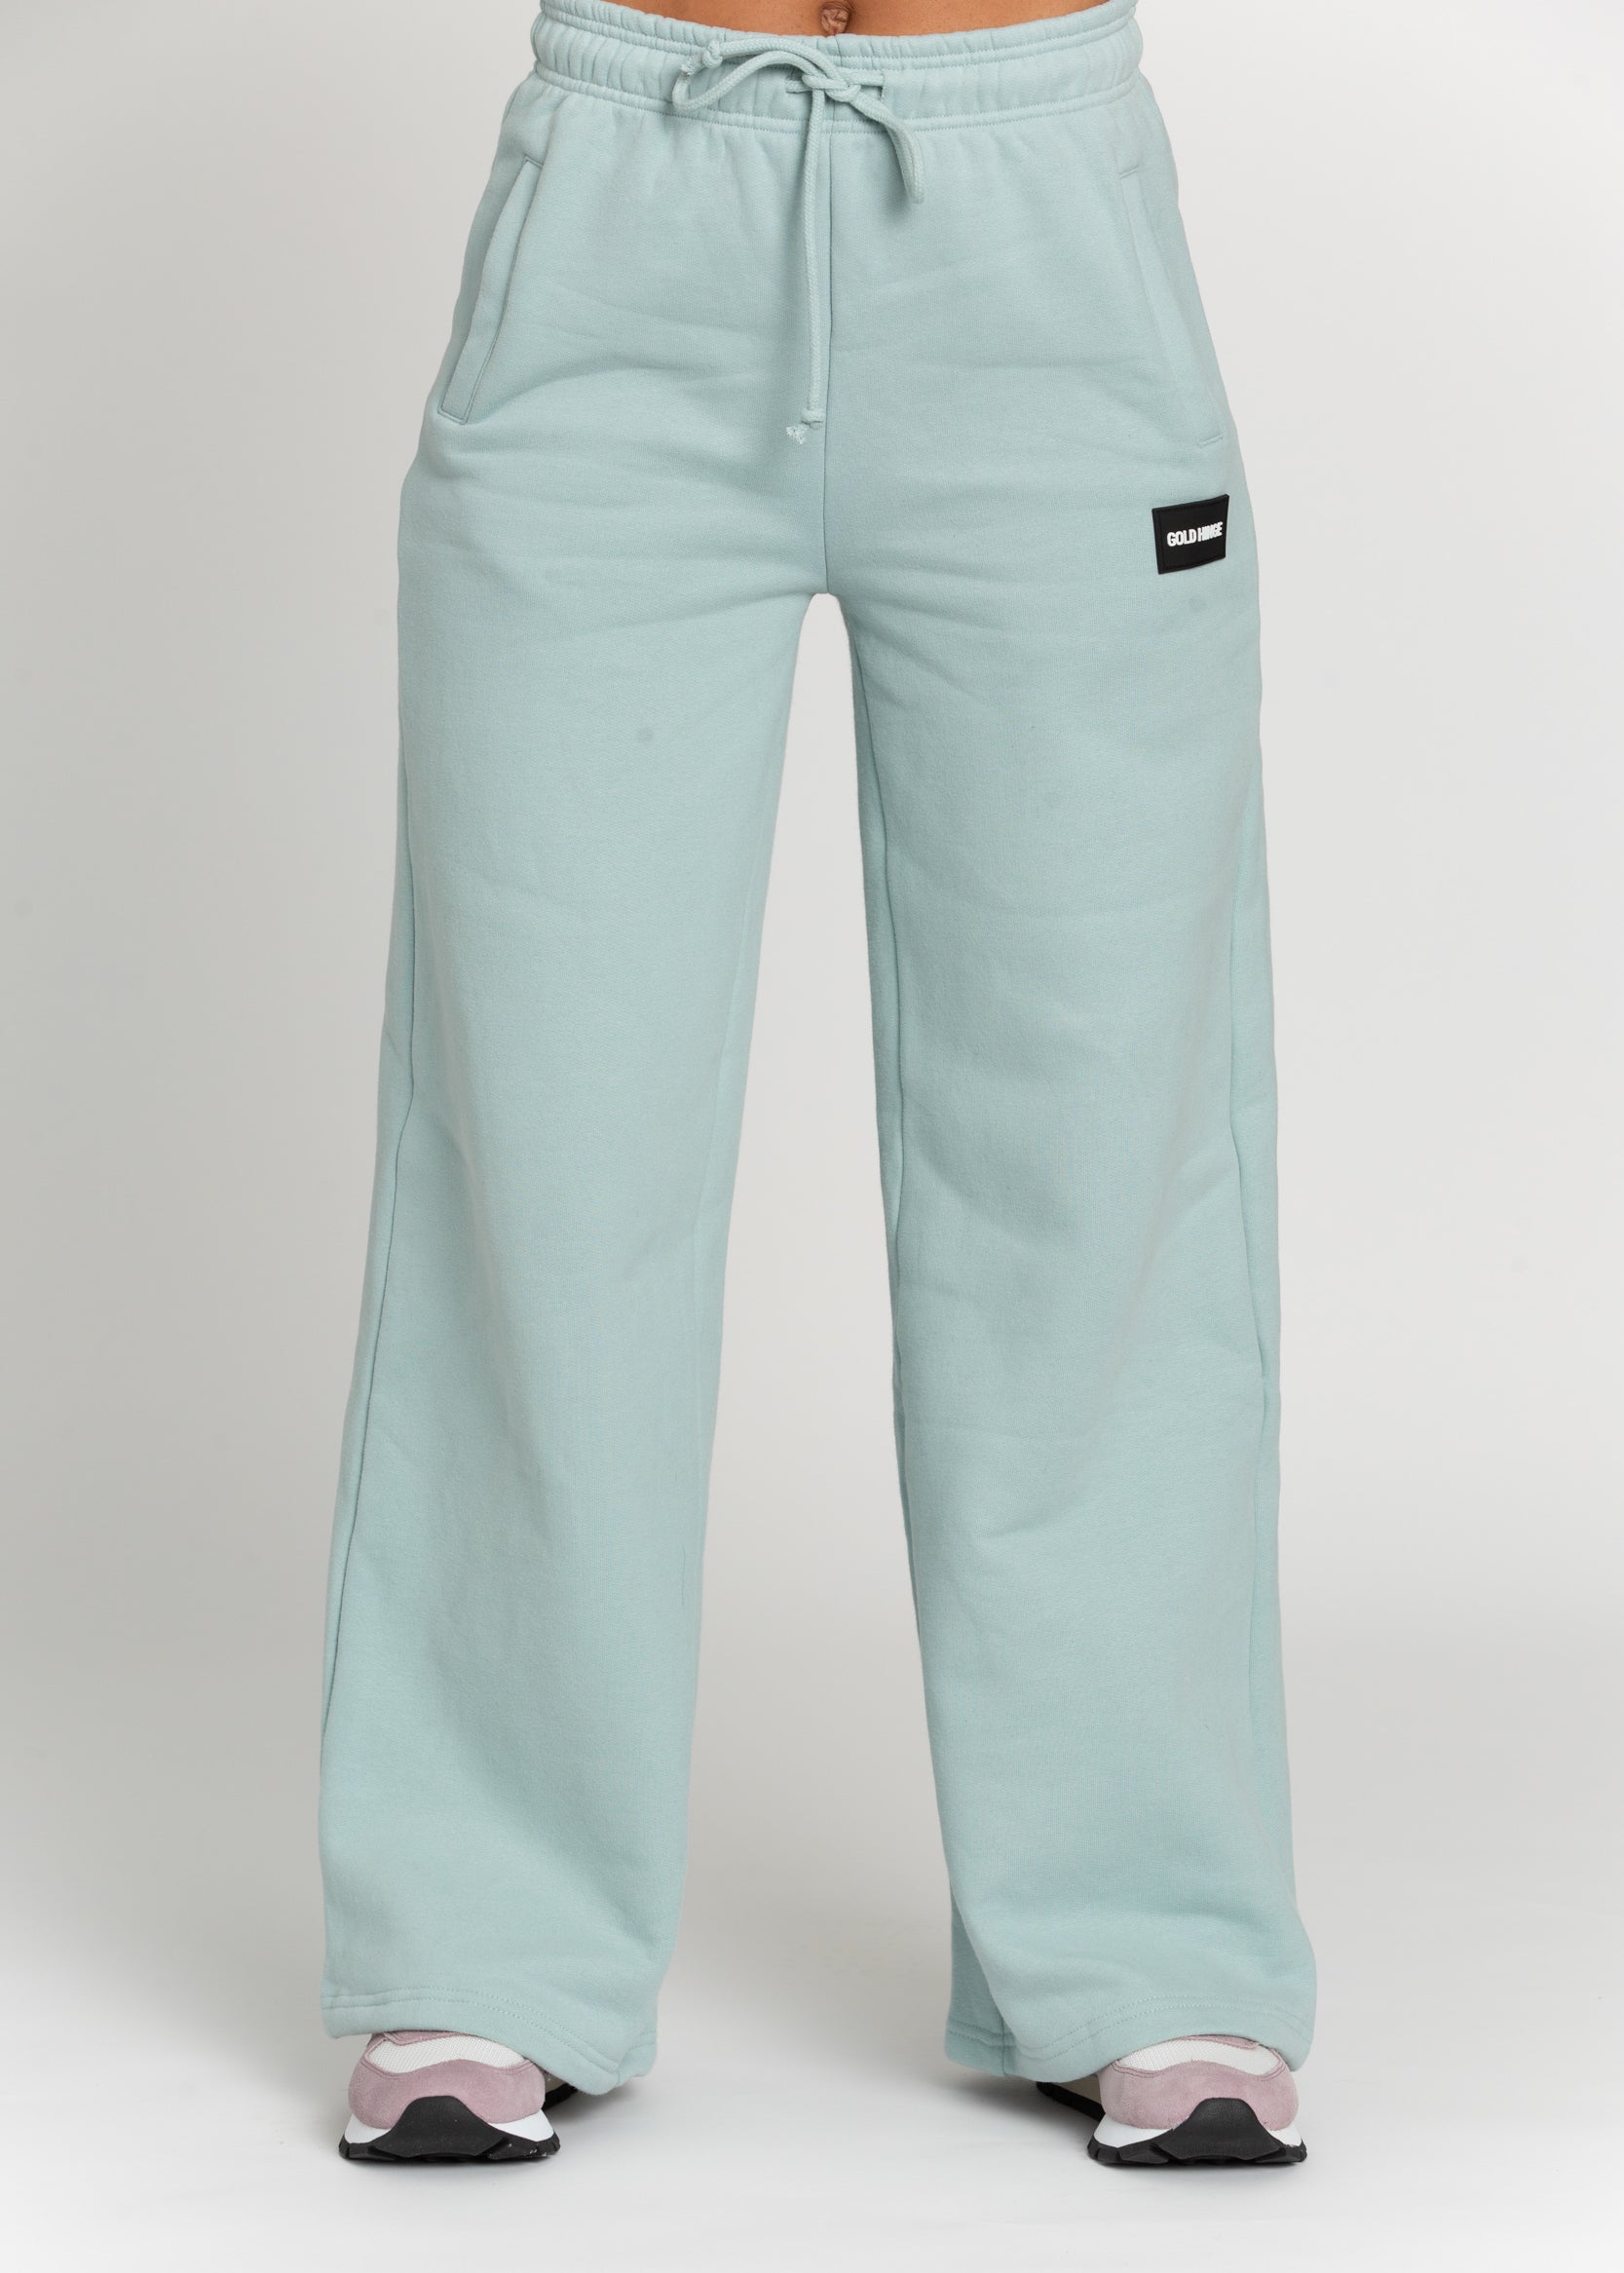 Our Iceberg Wide Leg Sweatpants are the perfect combination of comfort and style - they're made with the softest material, and have functional pockets to store your essentials. They look great with a matching sweatshirt or any Gold Hinge top, and you'll love them no matter how you wear them. 